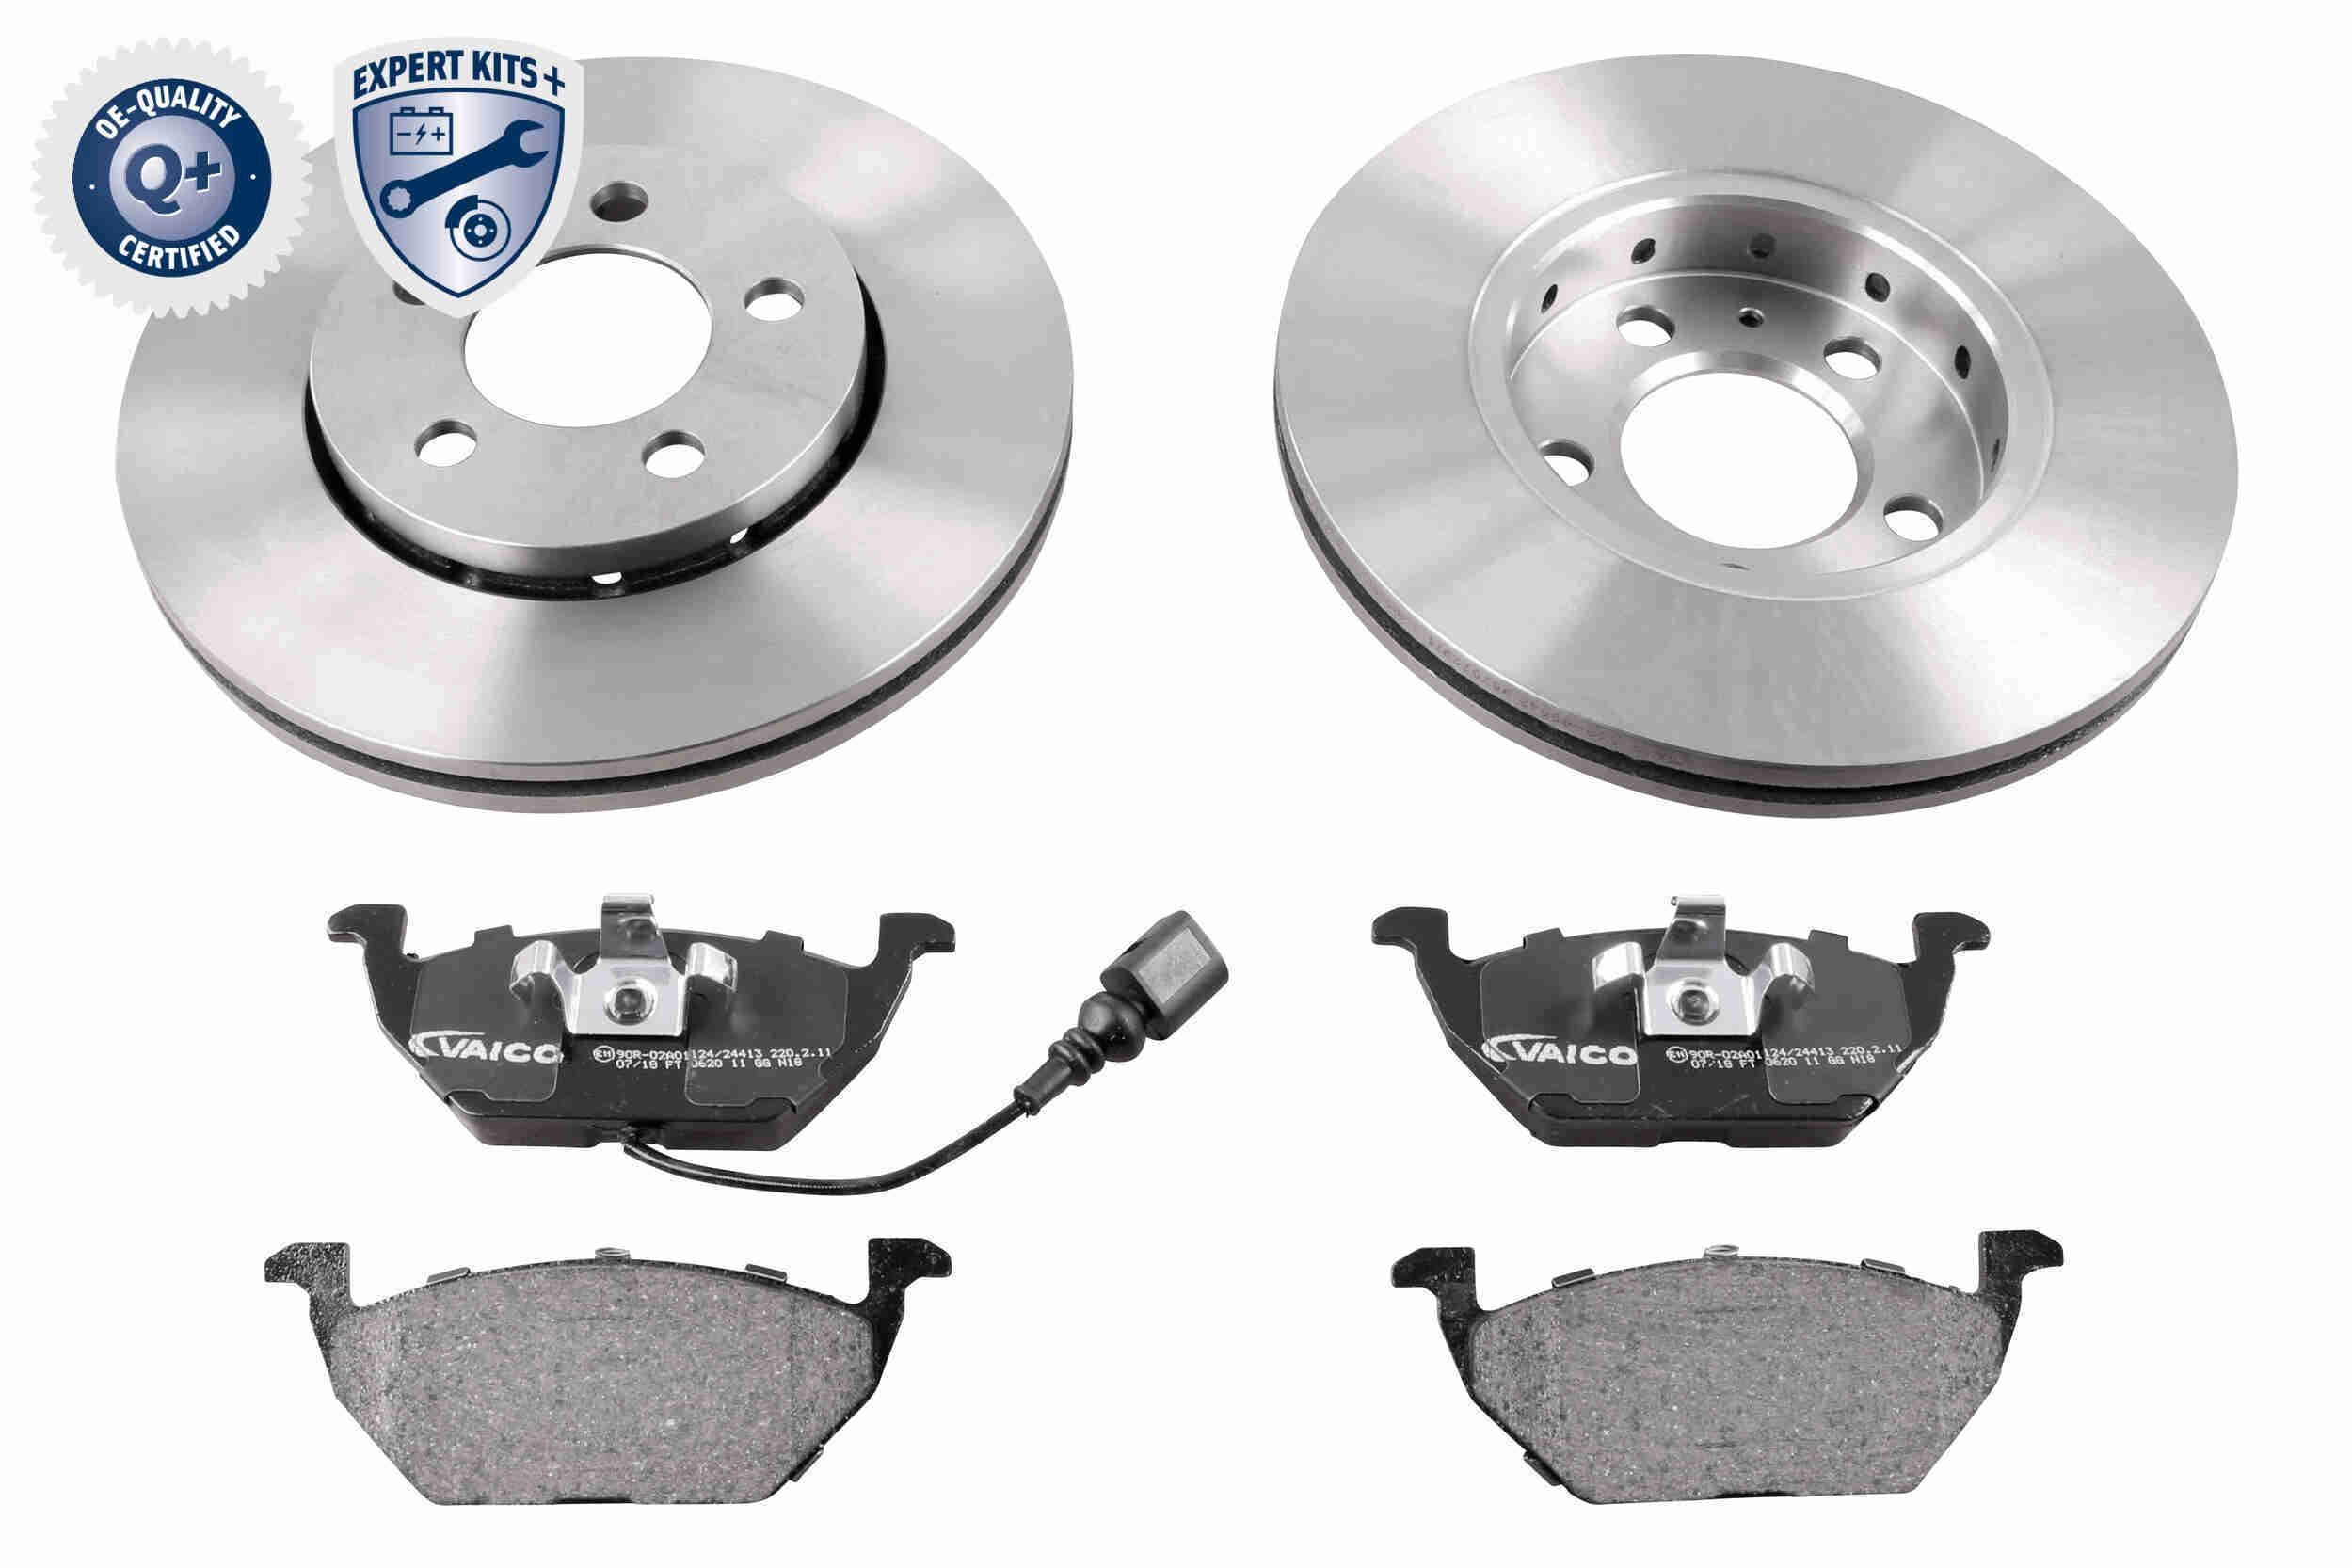 VAICO V10-90001 Brake discs and pads set Front Axle, Vented, with brake pads, EXPERT KITS +, incl. wear warning contact